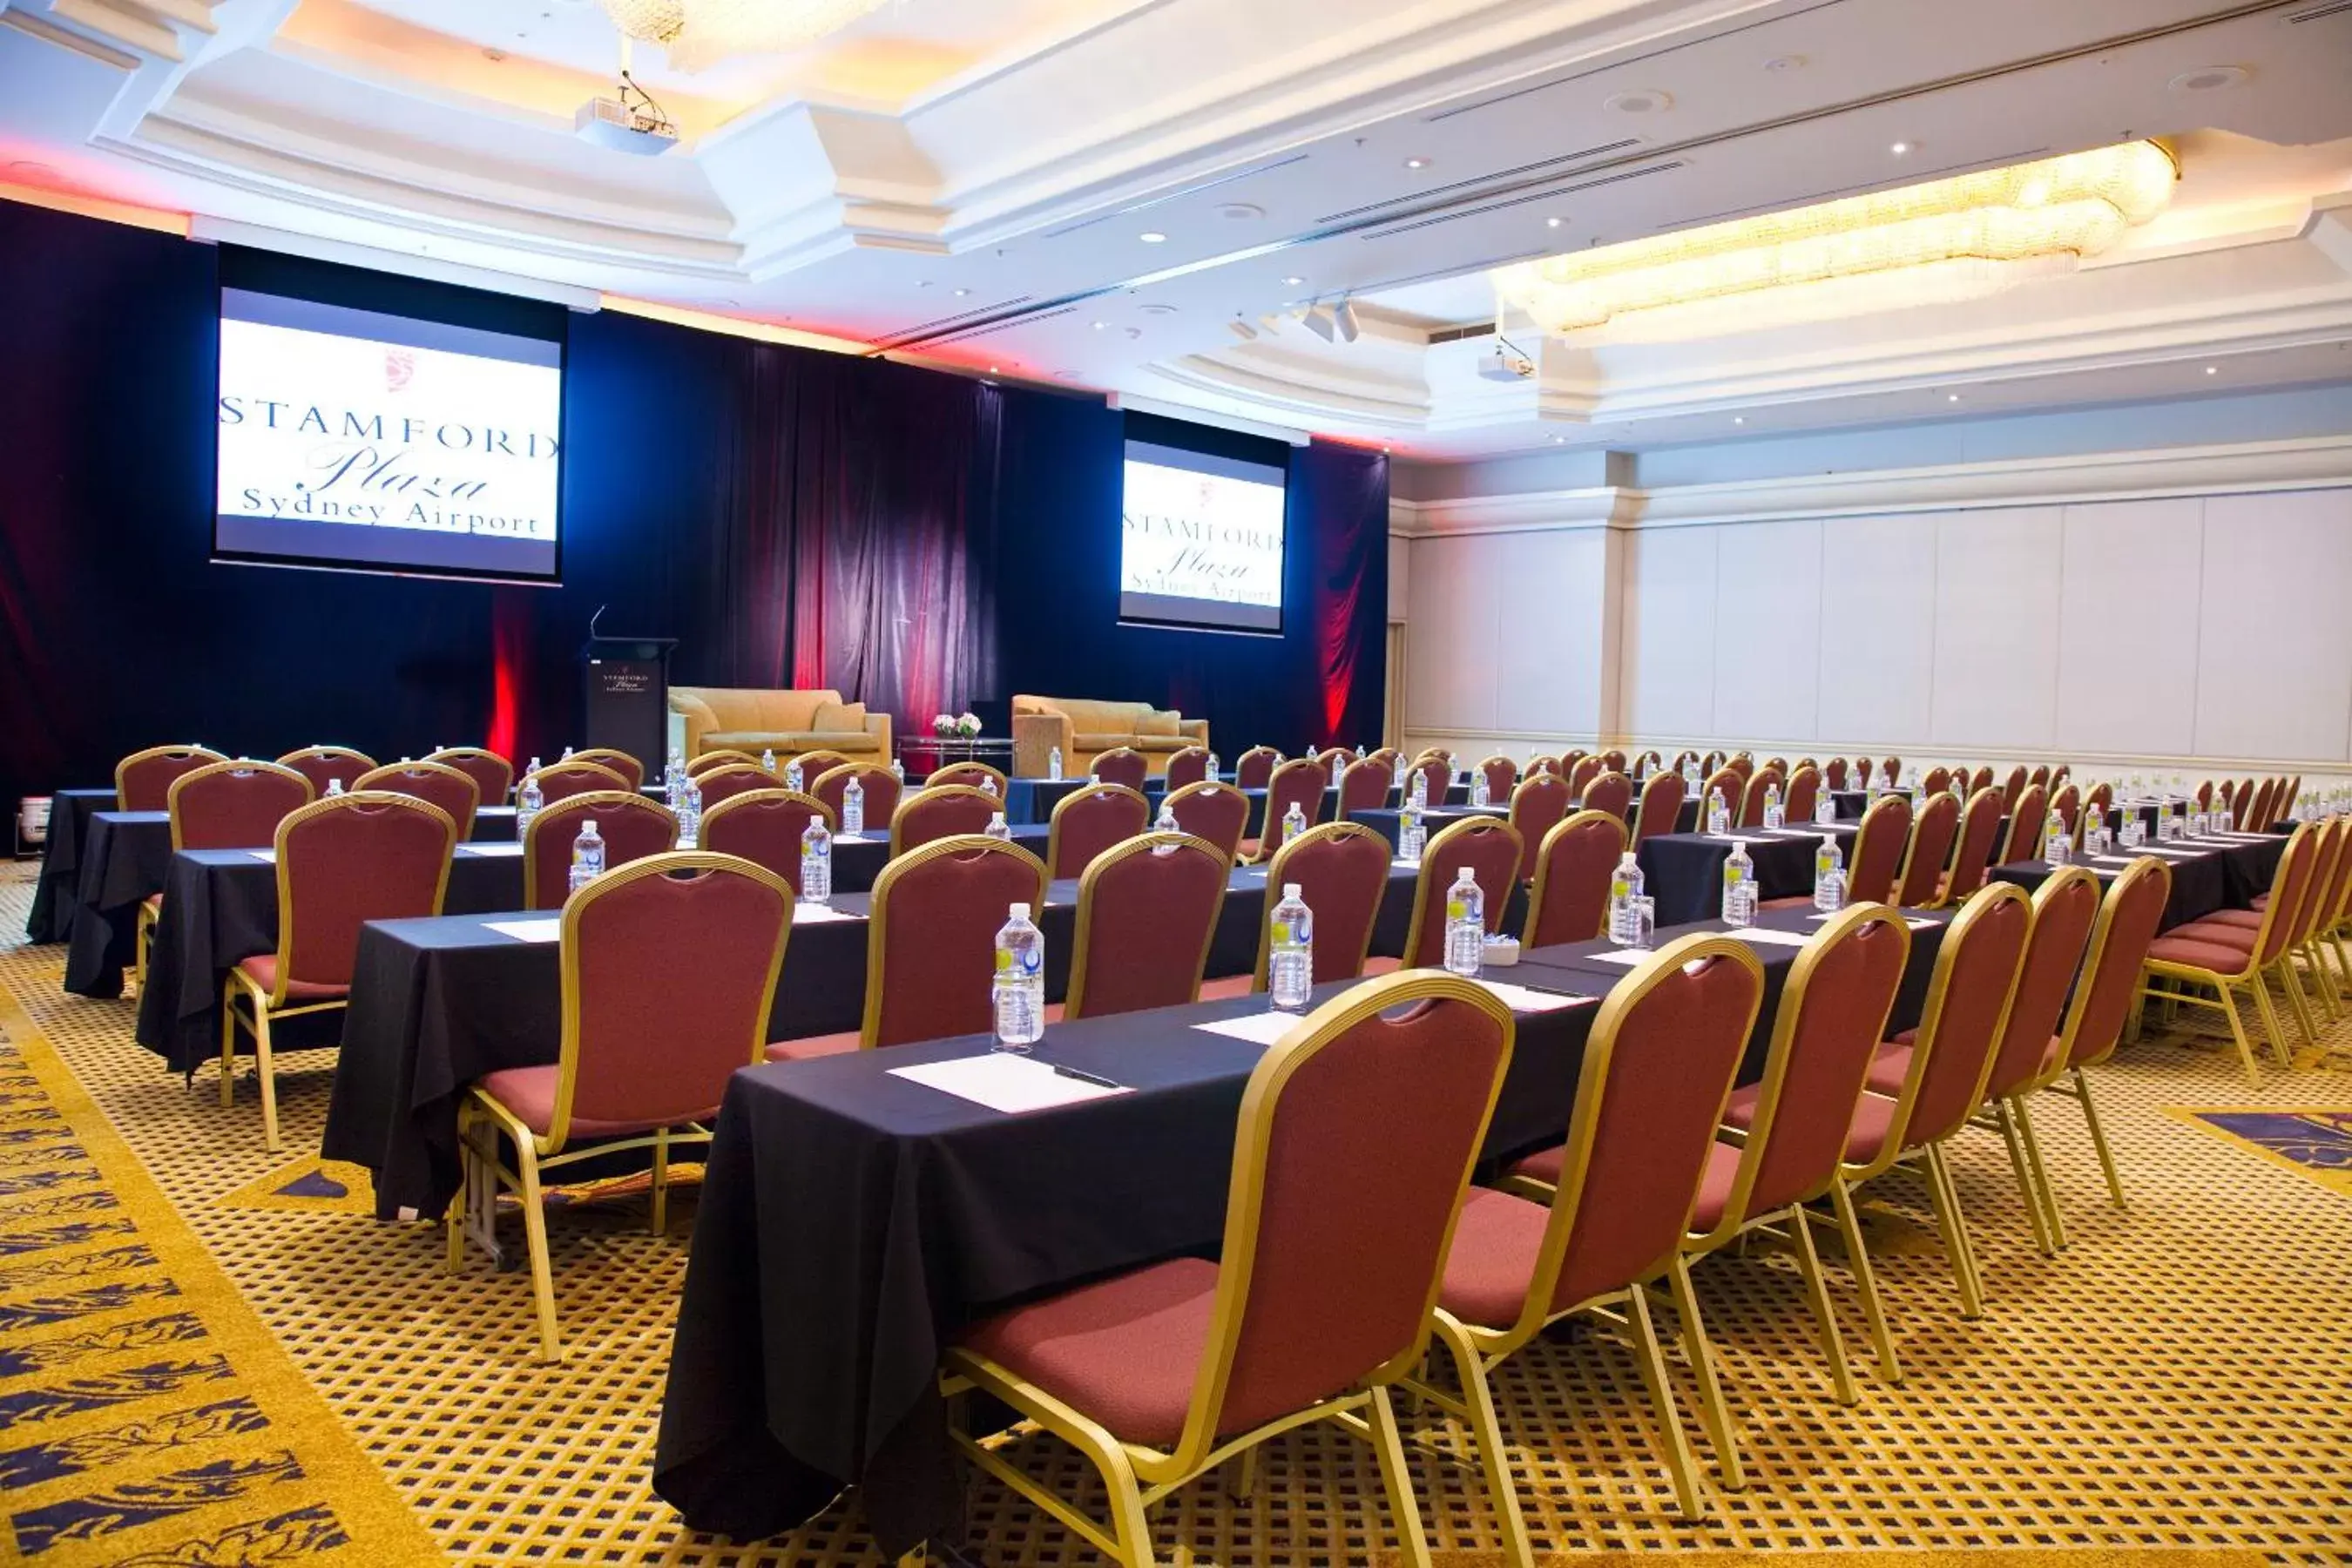 Banquet/Function facilities in Stamford Plaza Sydney Airport Hotel & Conference Centre